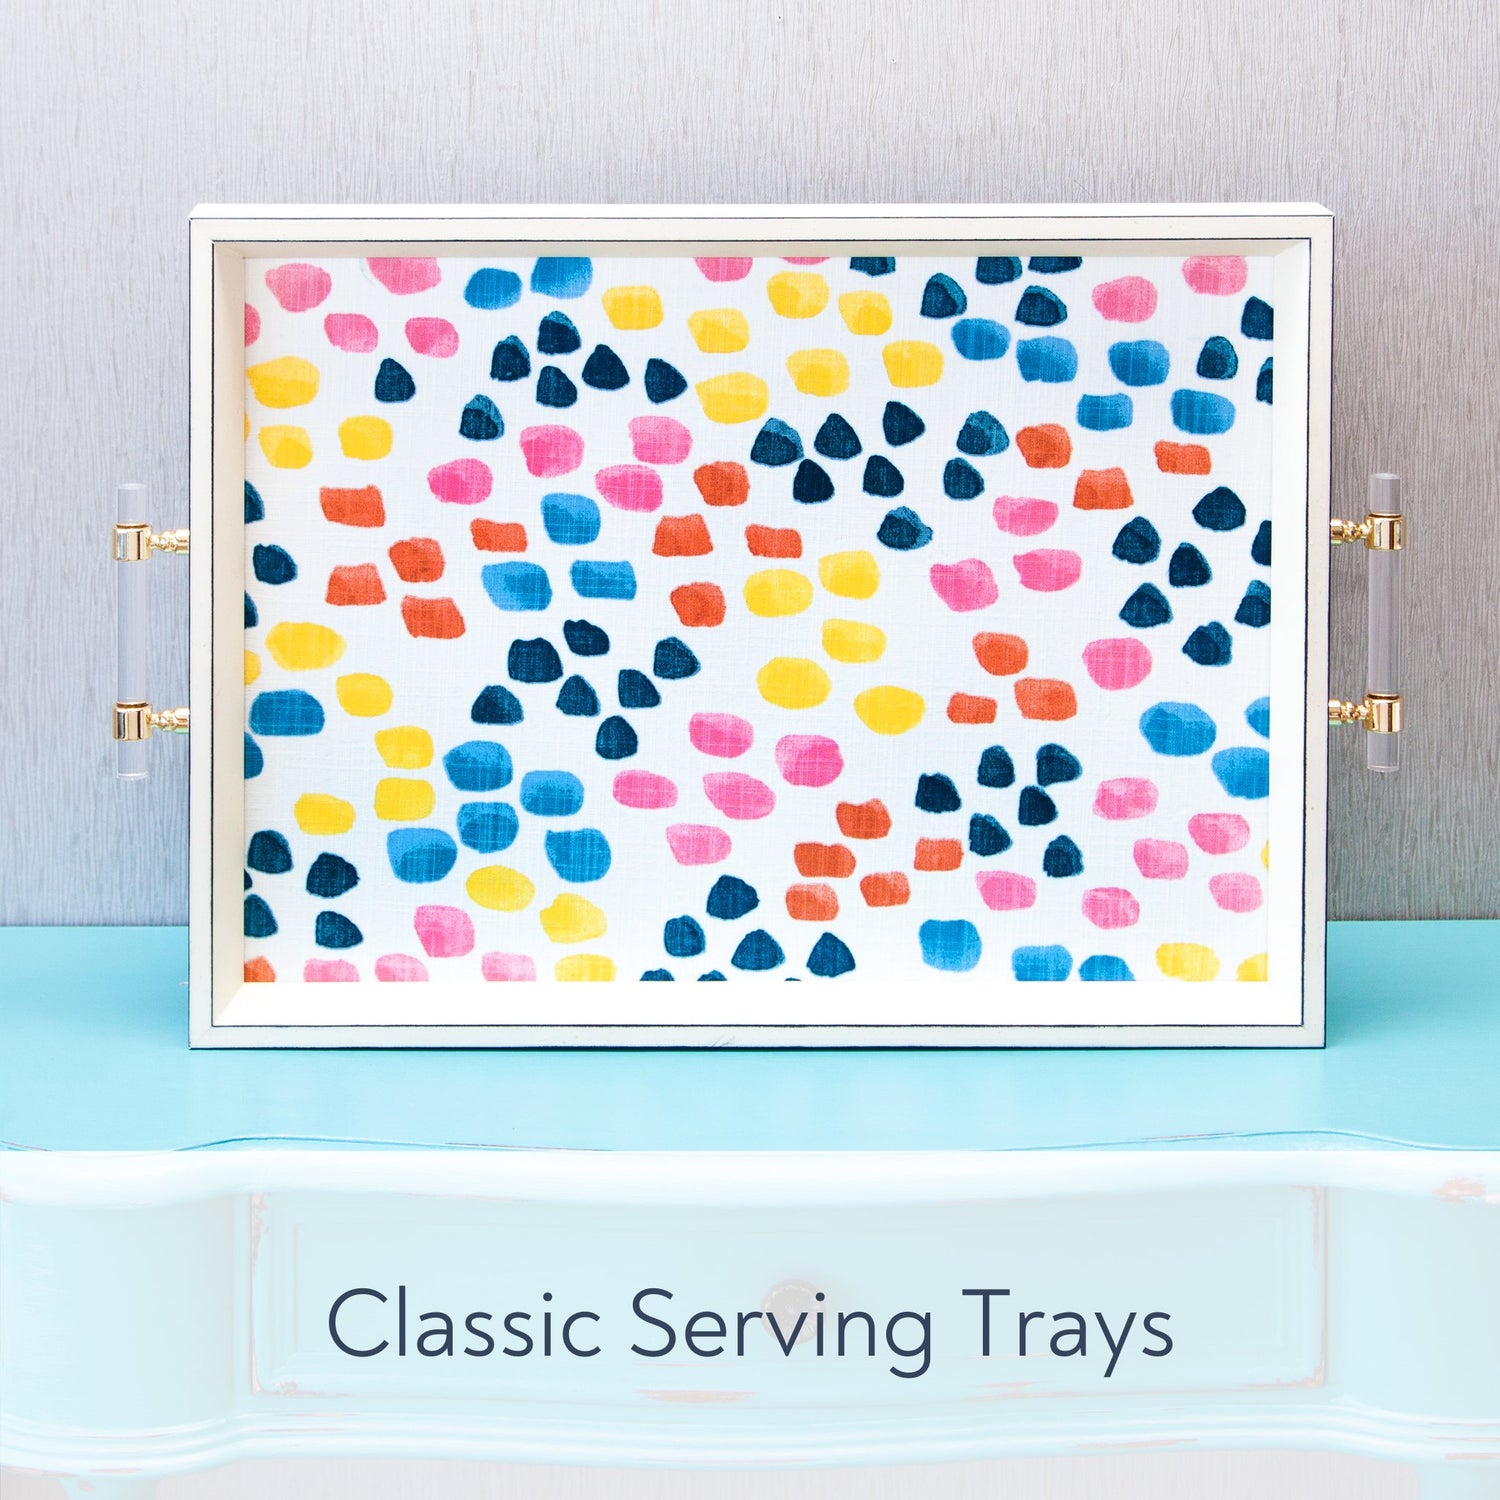 Classic Serving Trays